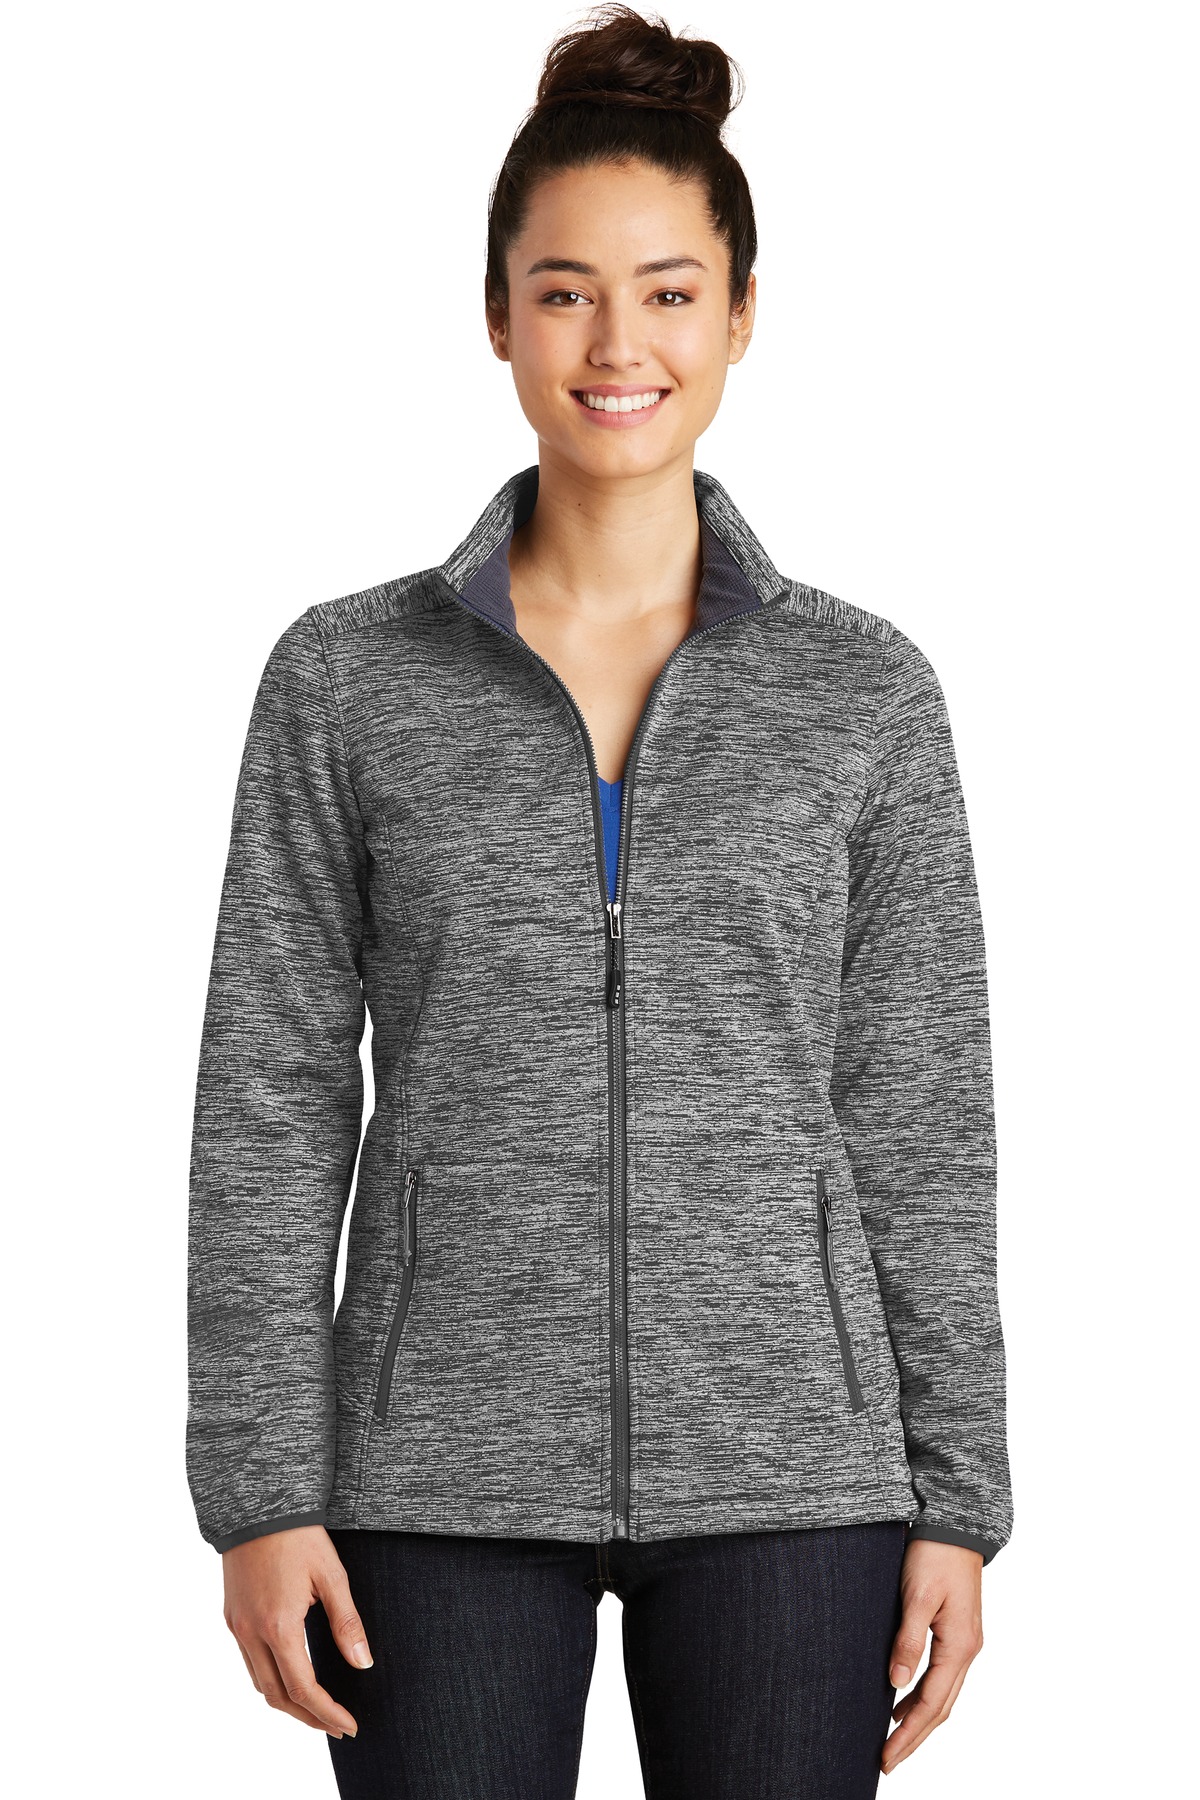 Sport-Tek Ladies Outerwear for Corporate & Hospitality ® Ladies PosiCharge® Electric Heather Soft Shell Jacket.-Sport-Tek